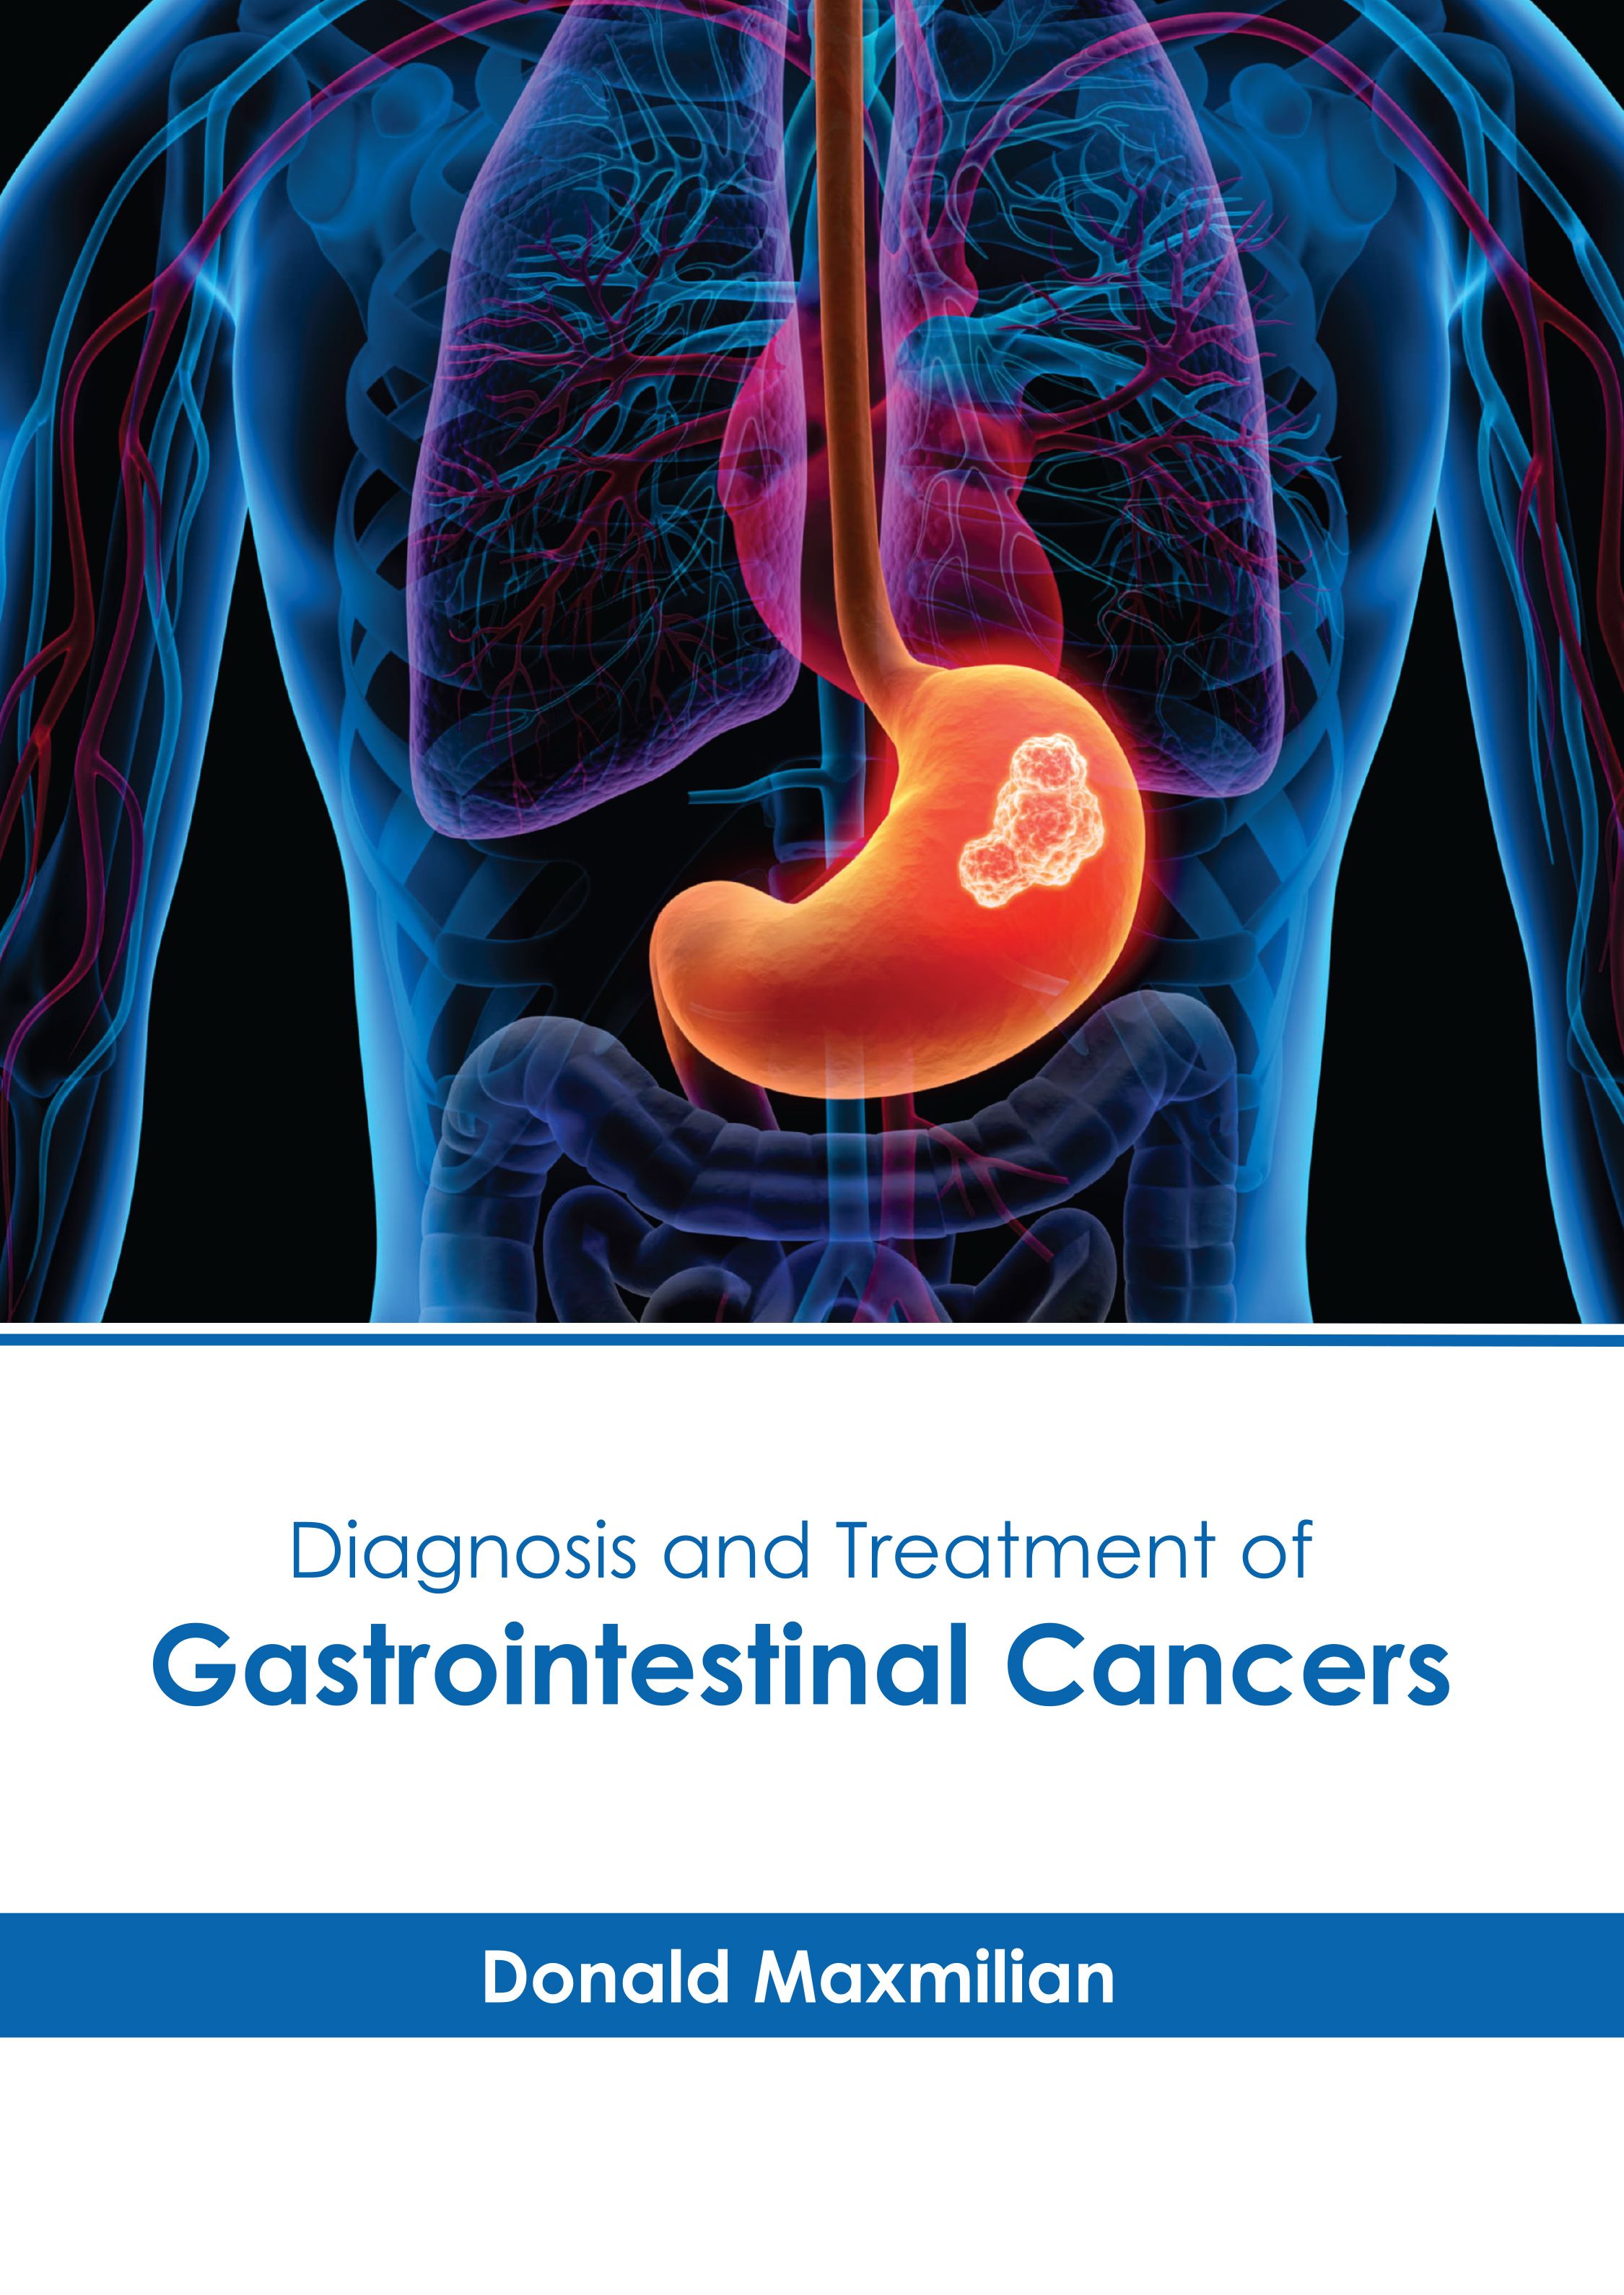 

exclusive-publishers/american-medical-publishers/diagnosis-and-treatment-of-gastrointestinal-cancers-9798887400587